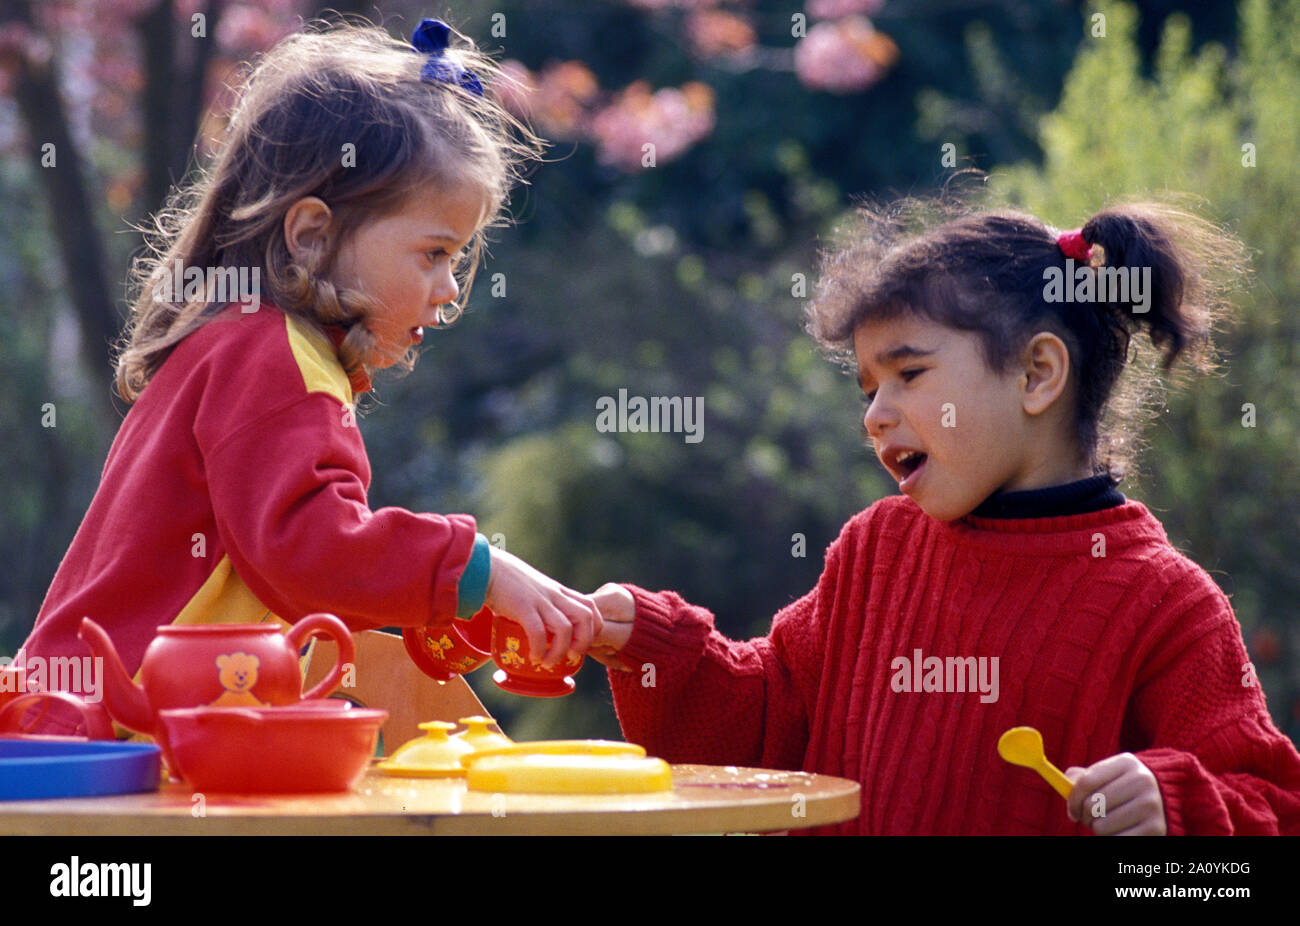 two little girls playing outdoors fighting over toy tea set Stock Photo